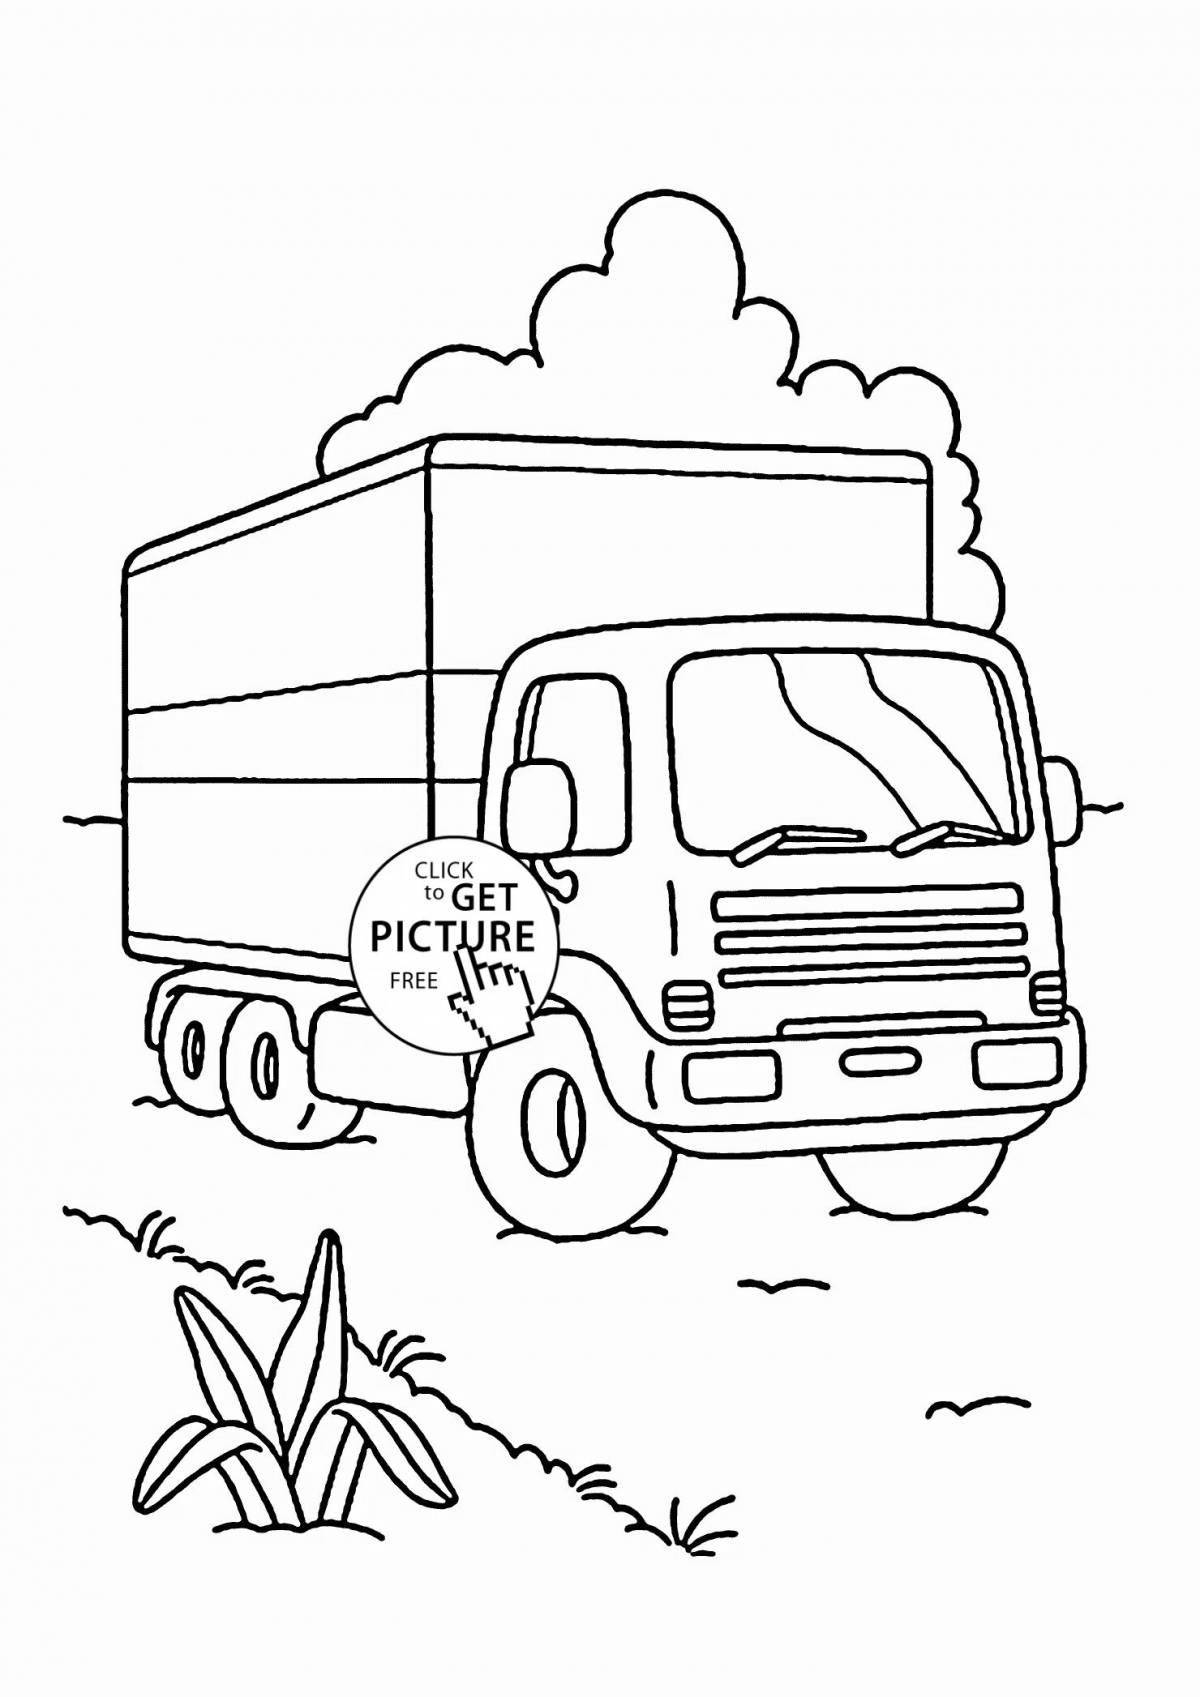 Exciting van coloring book for kids